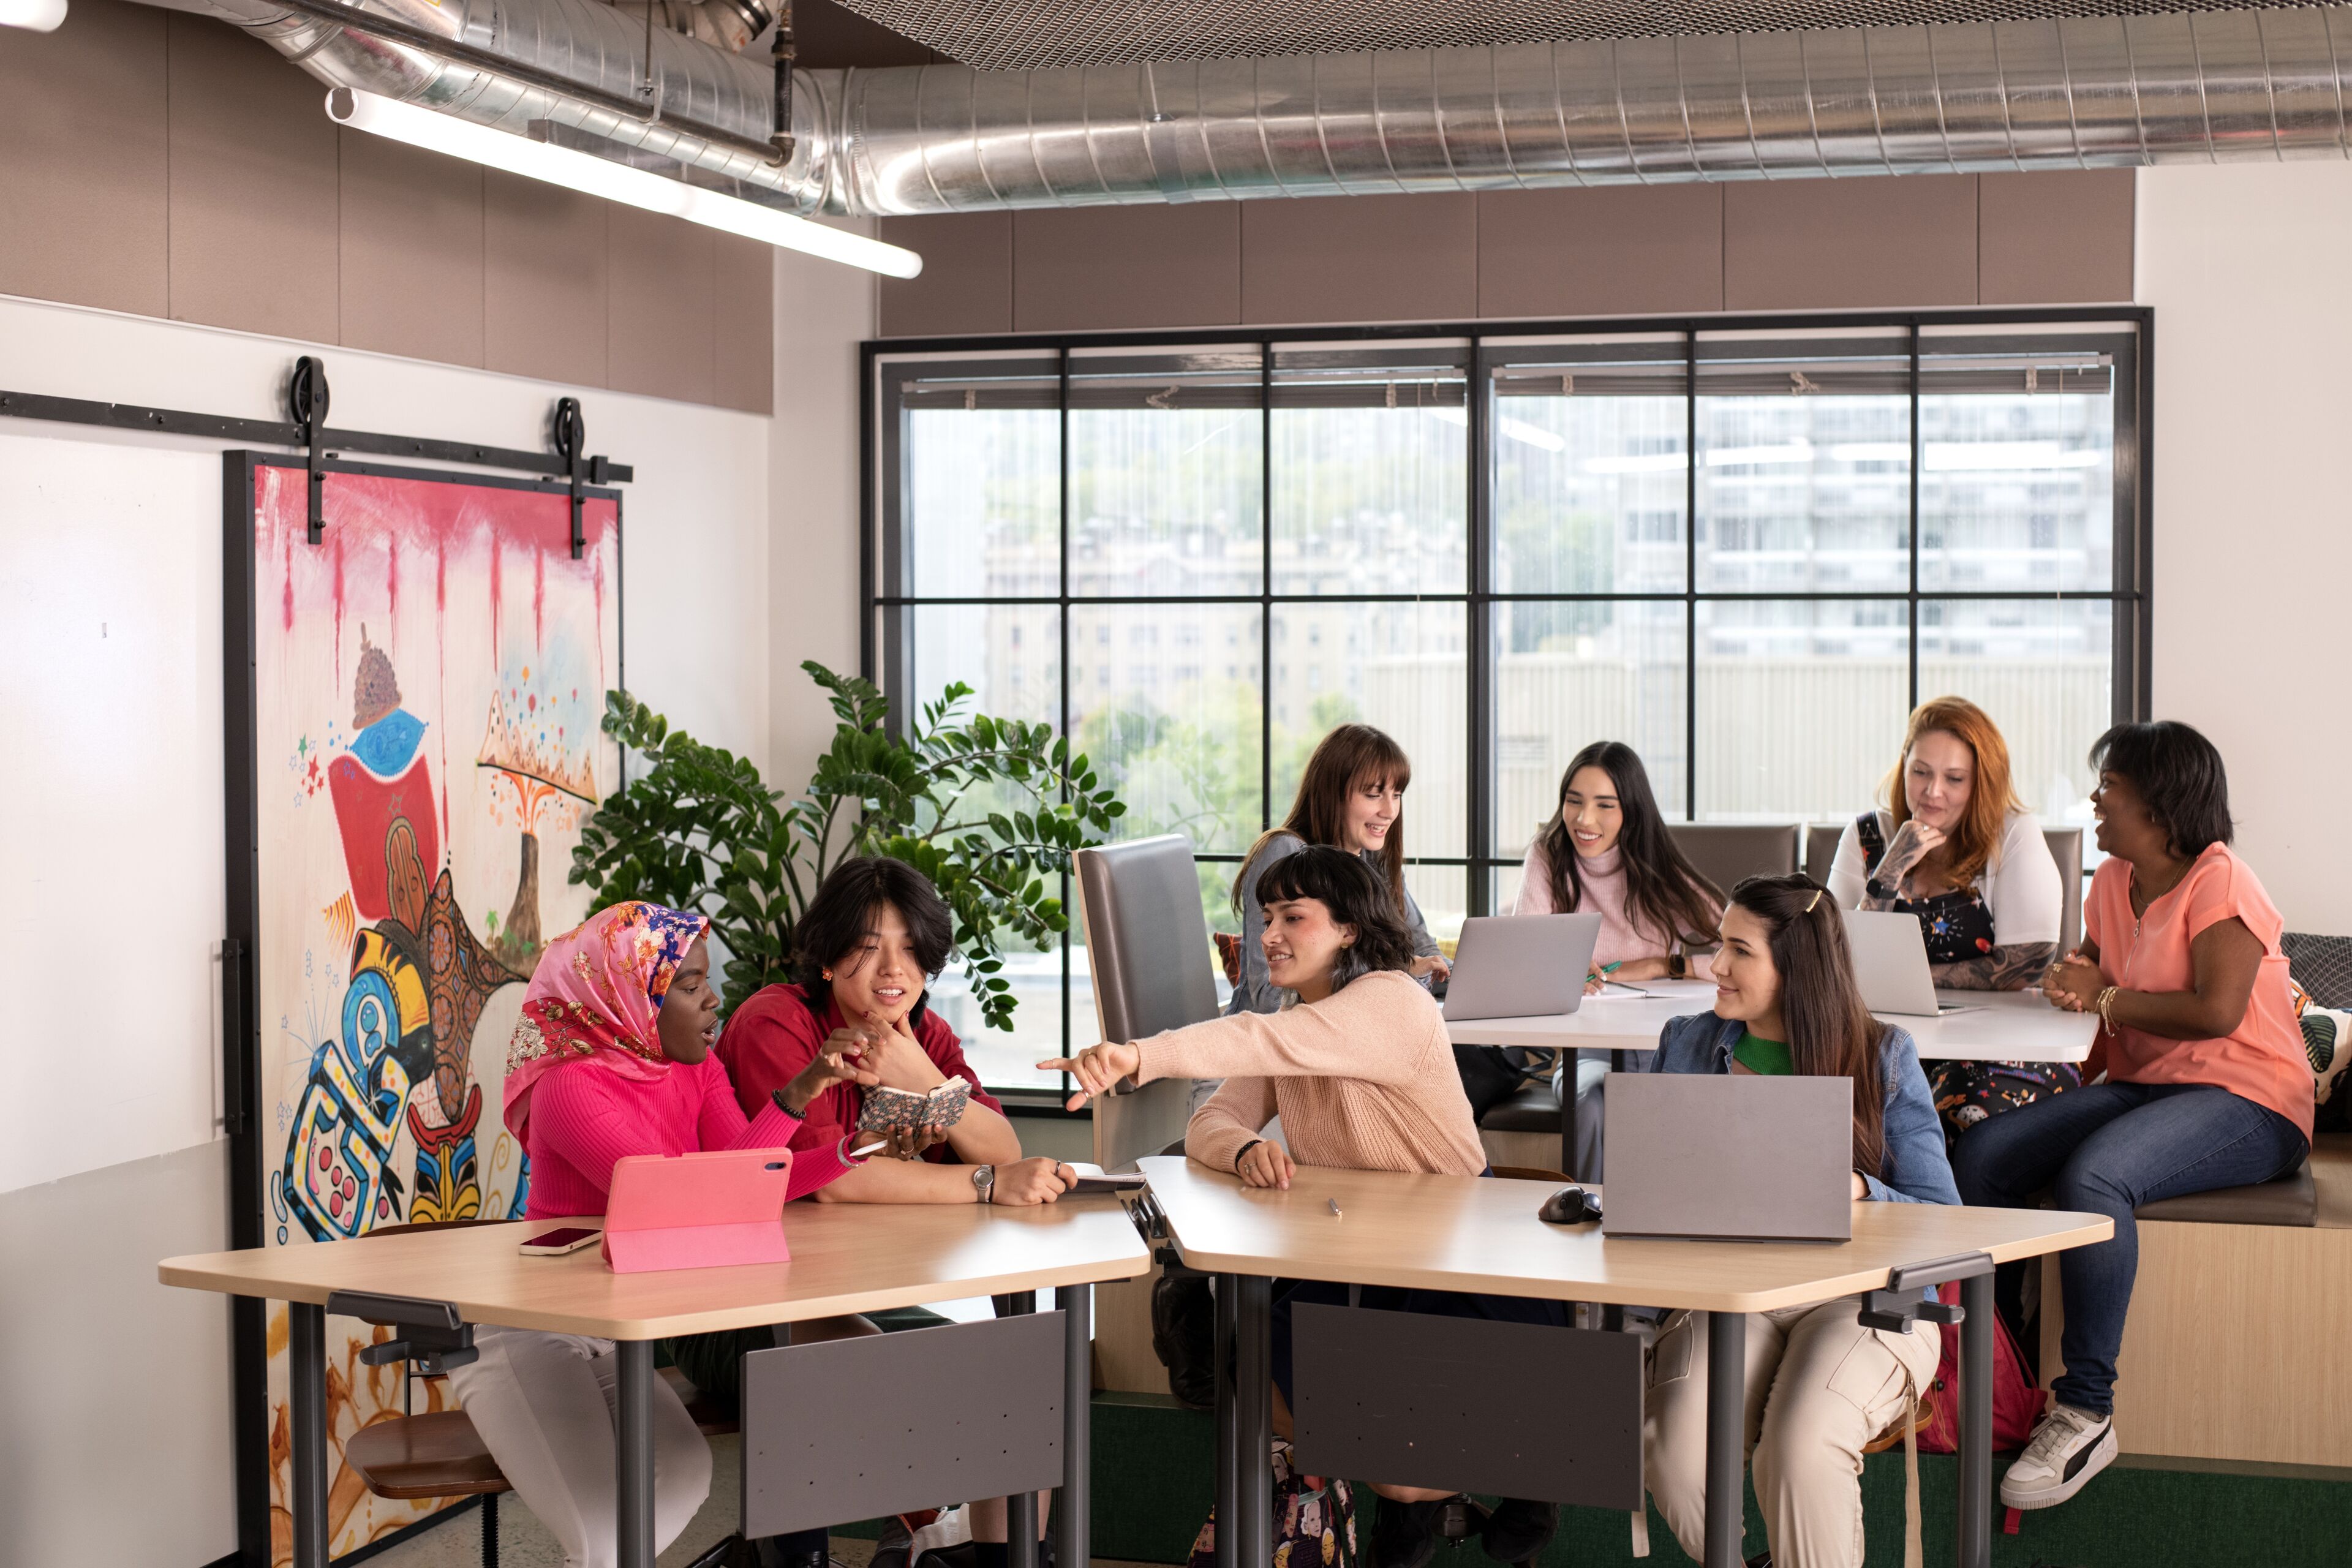 A group of eight diverse women engaging in a lively discussion around a table with laptops in a well-lit office space, adorned with modern art and plants.